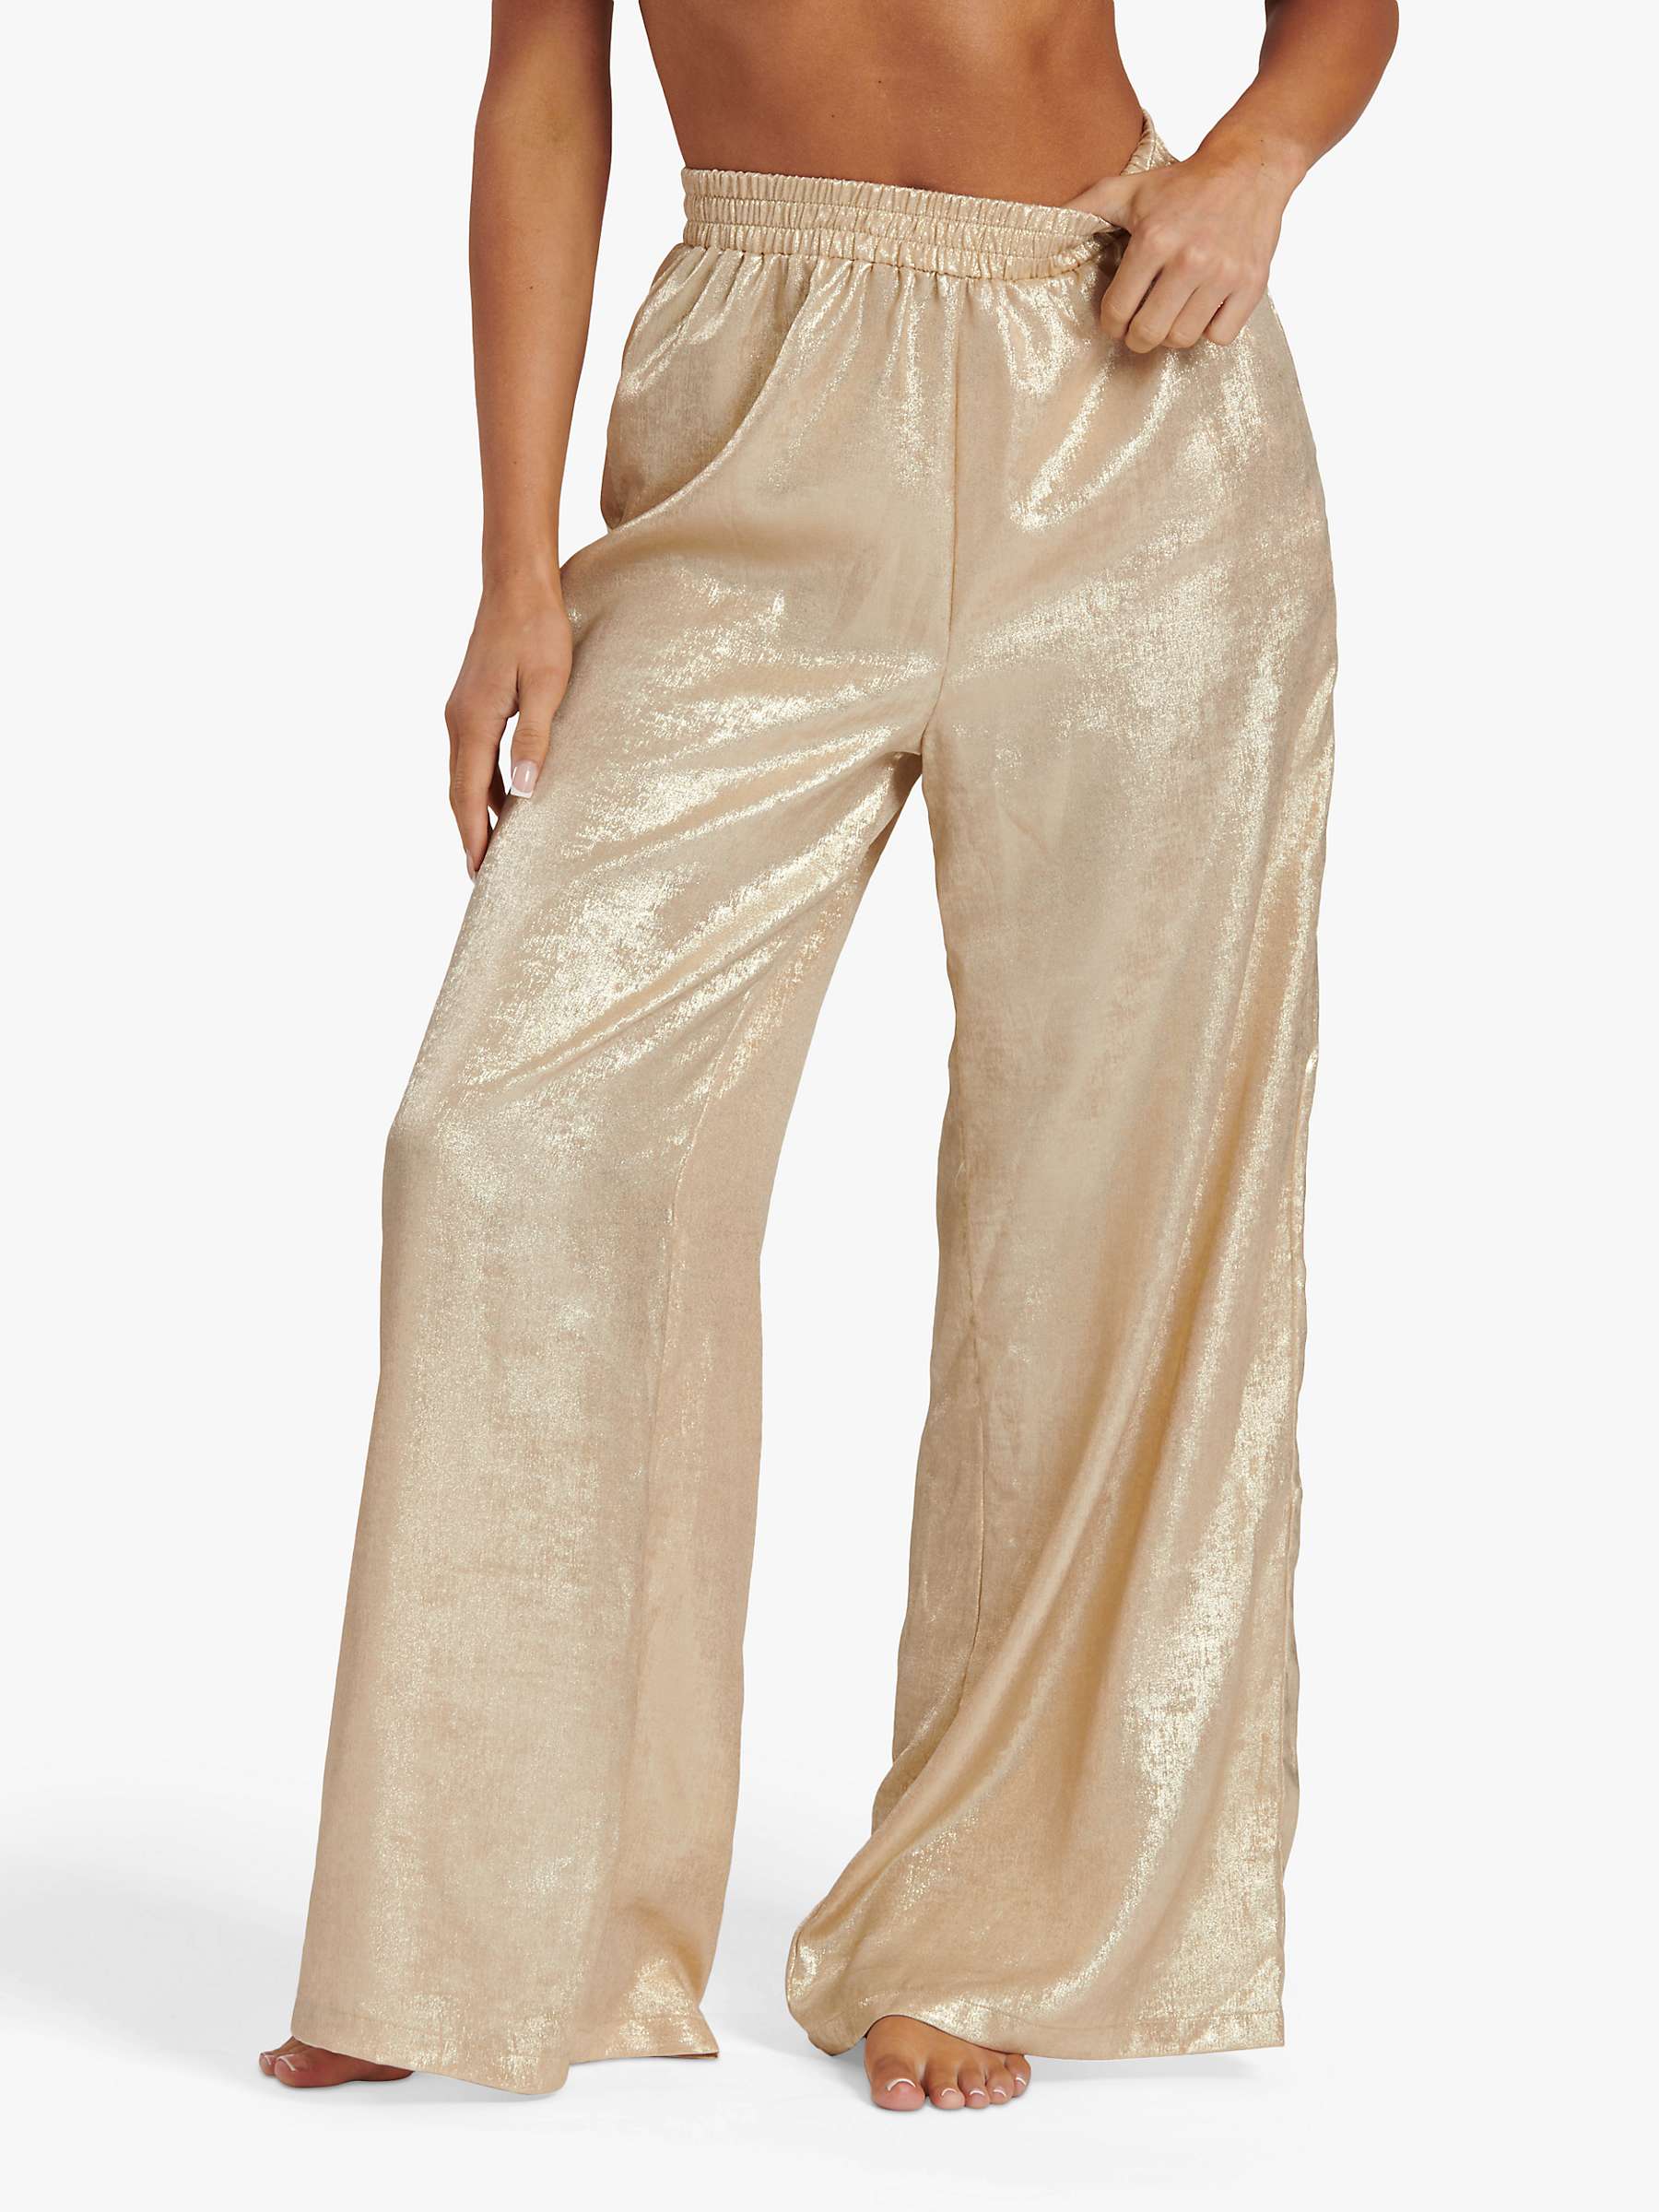 Buy South Beach Metallic Foil Wide Leg Trousers, Gold Online at johnlewis.com